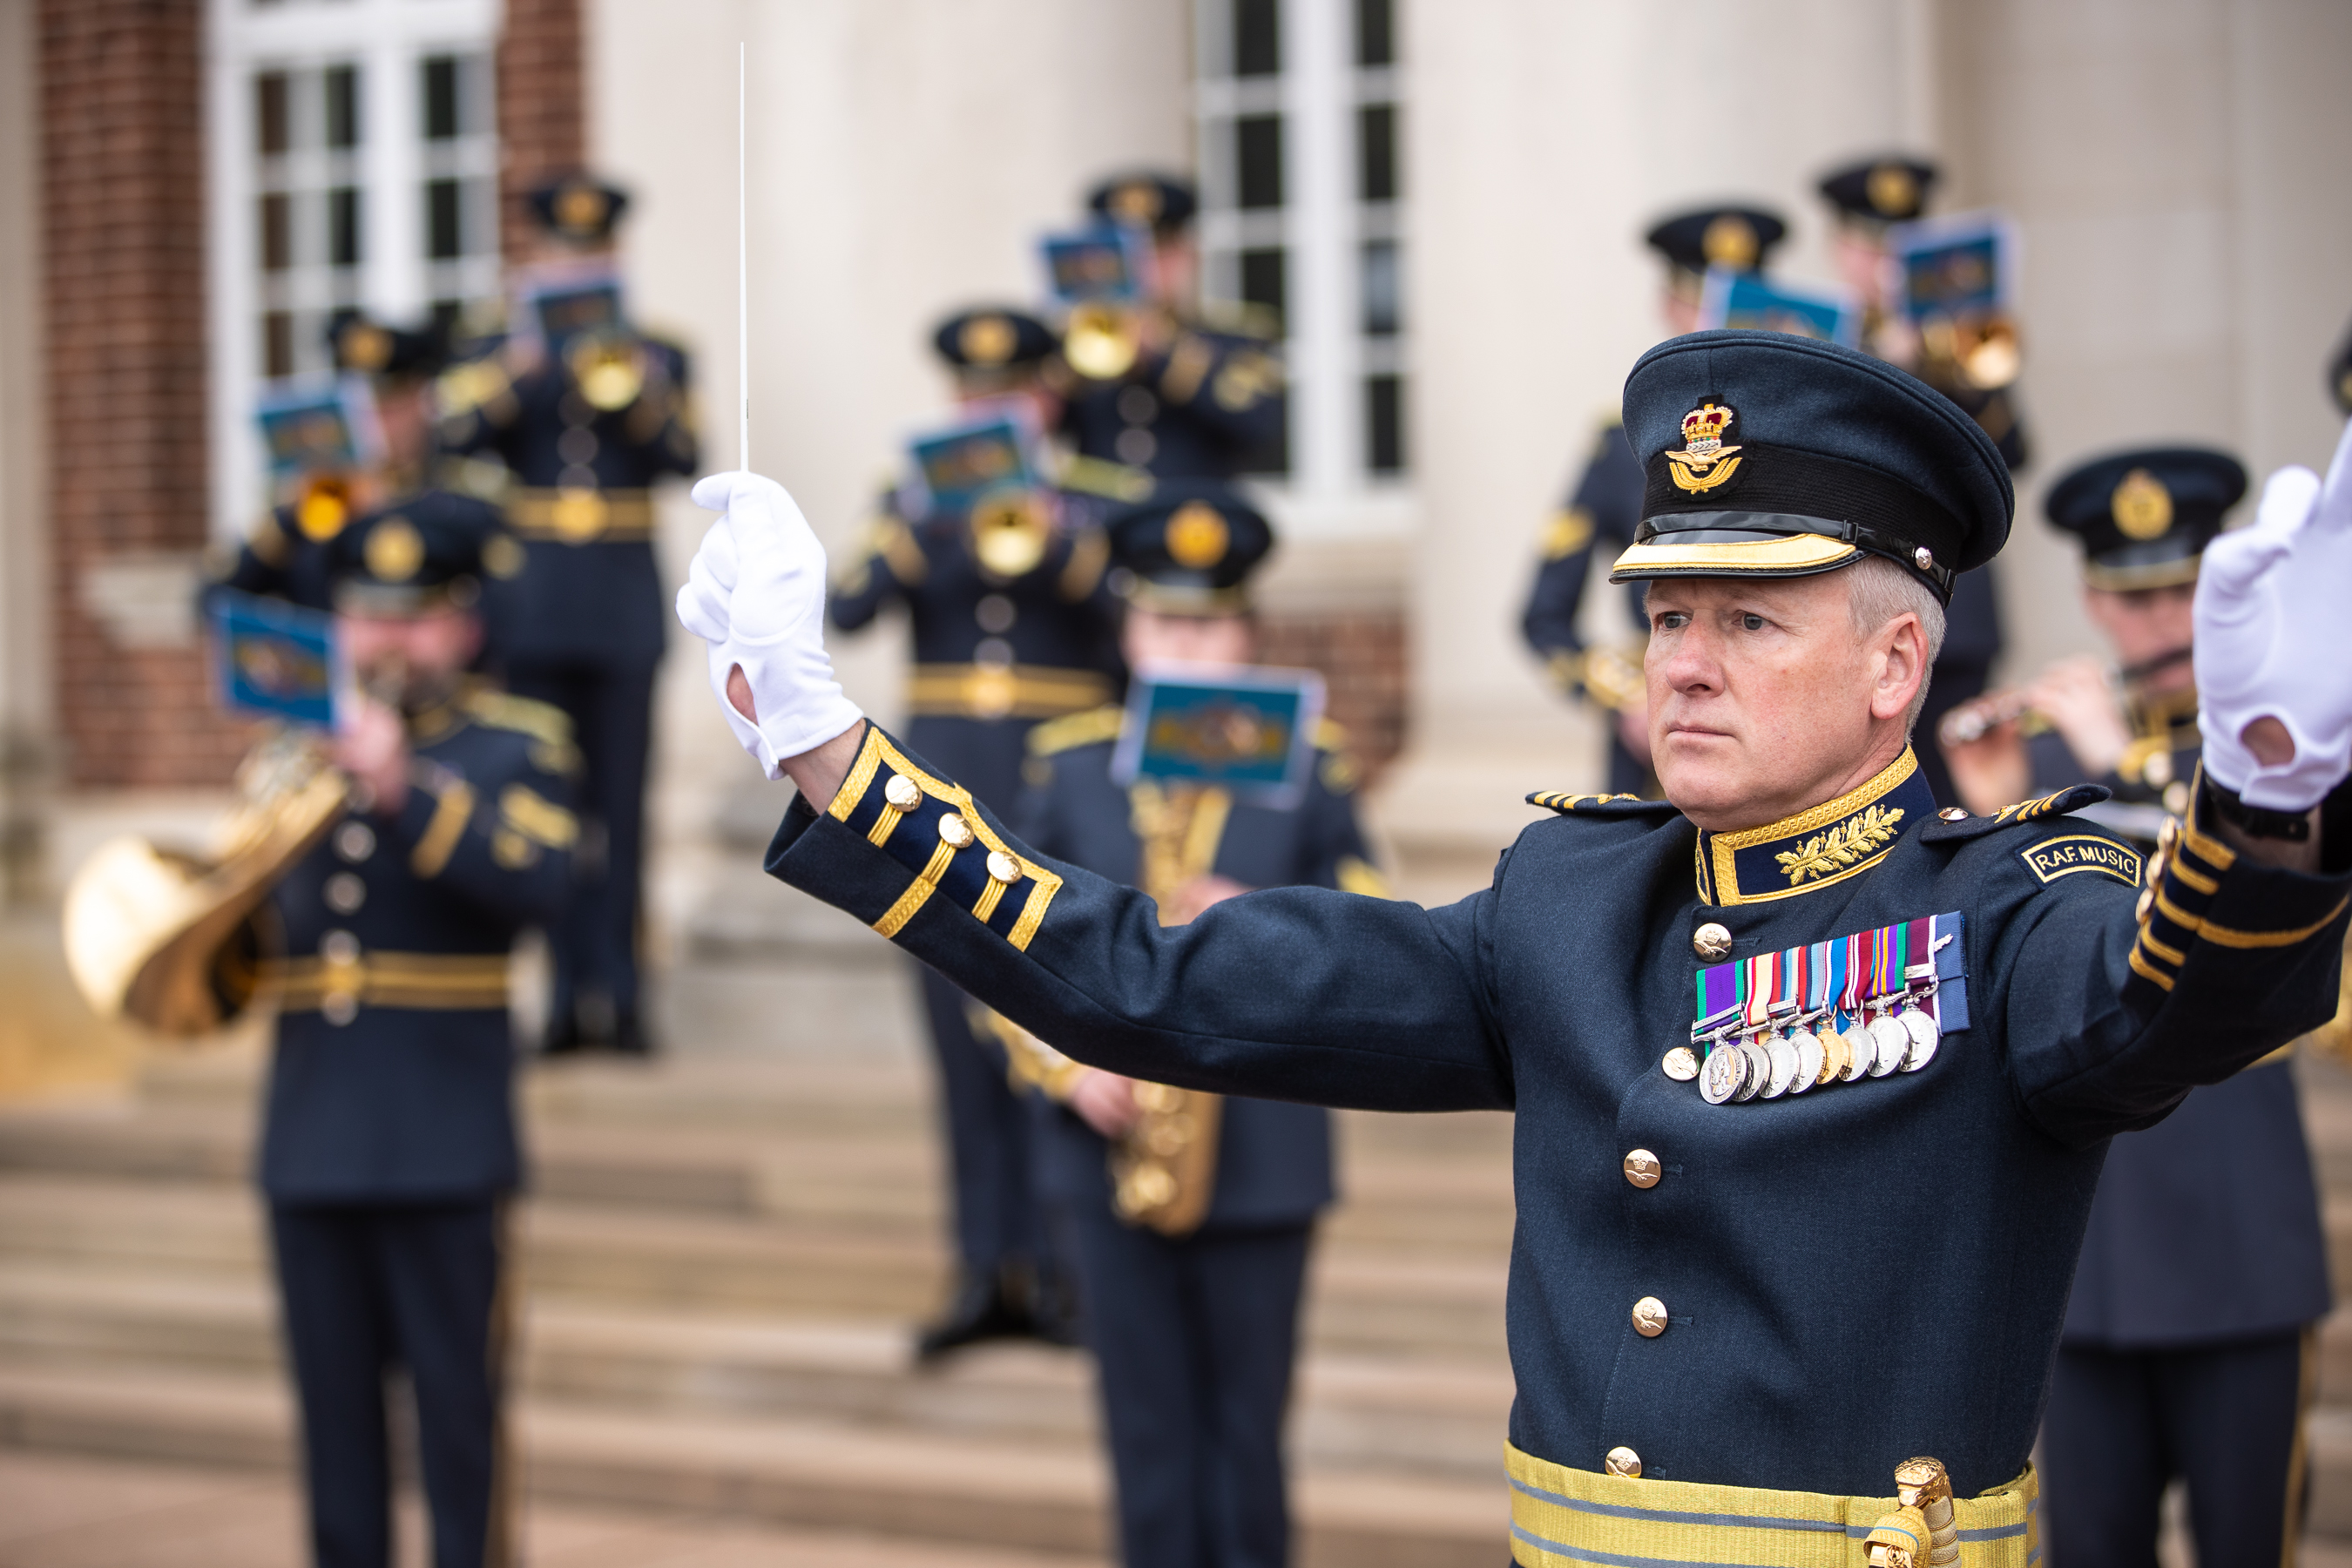 Band of the Royal Auxiliary Air Force performing outside, focused on the band conductor